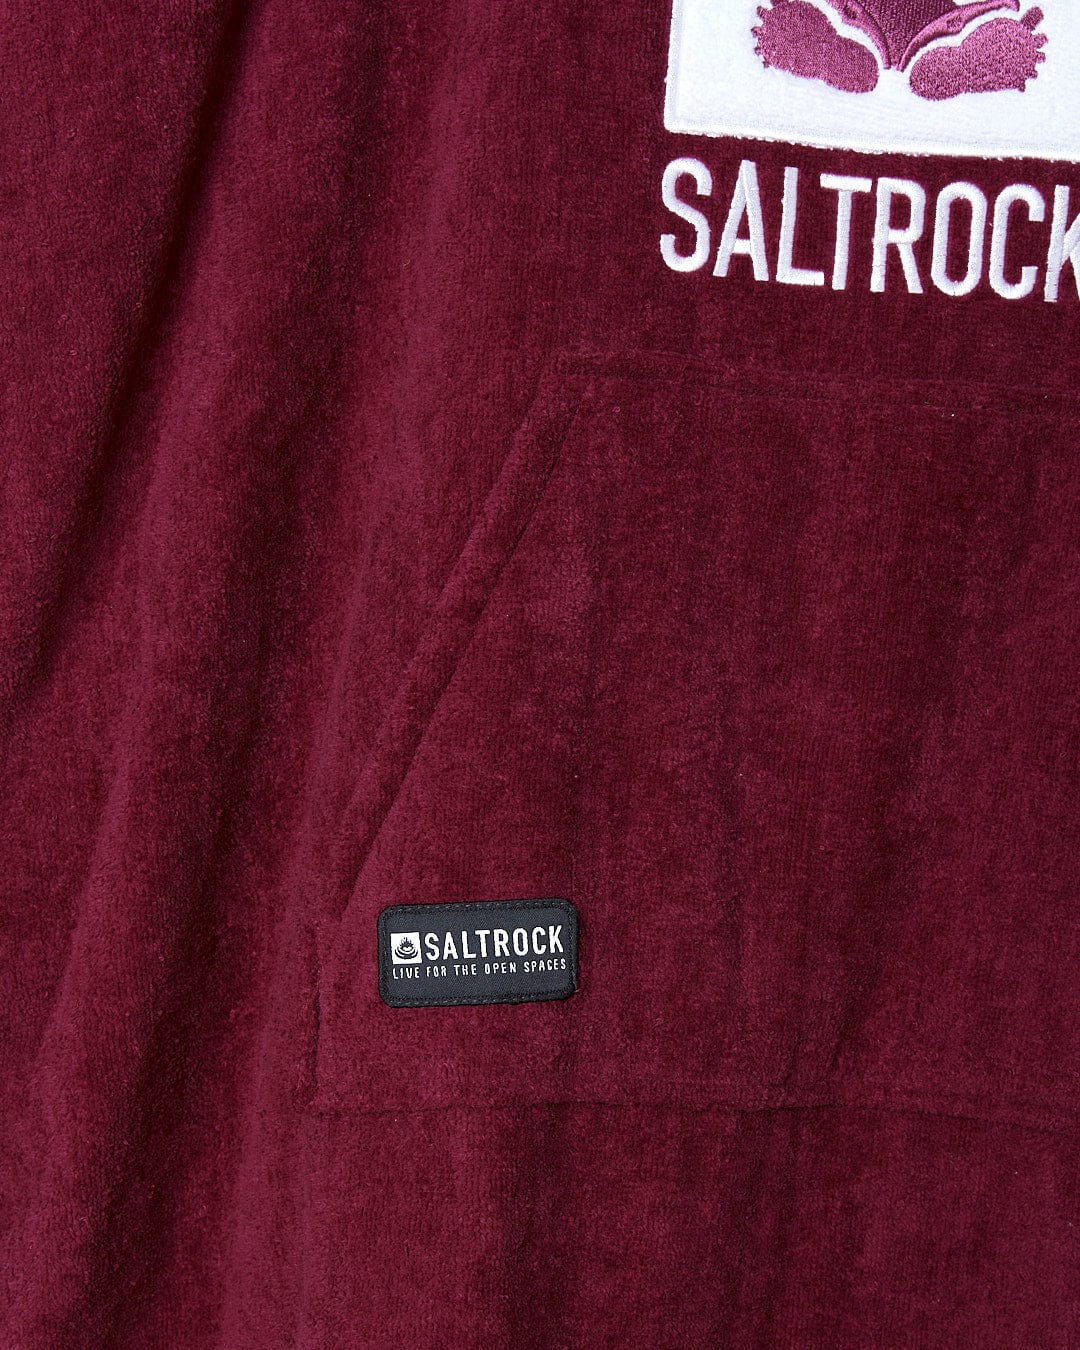 A maroon hoodie with the word Saltrock Classic Kids Changing Towel - Pink on it.